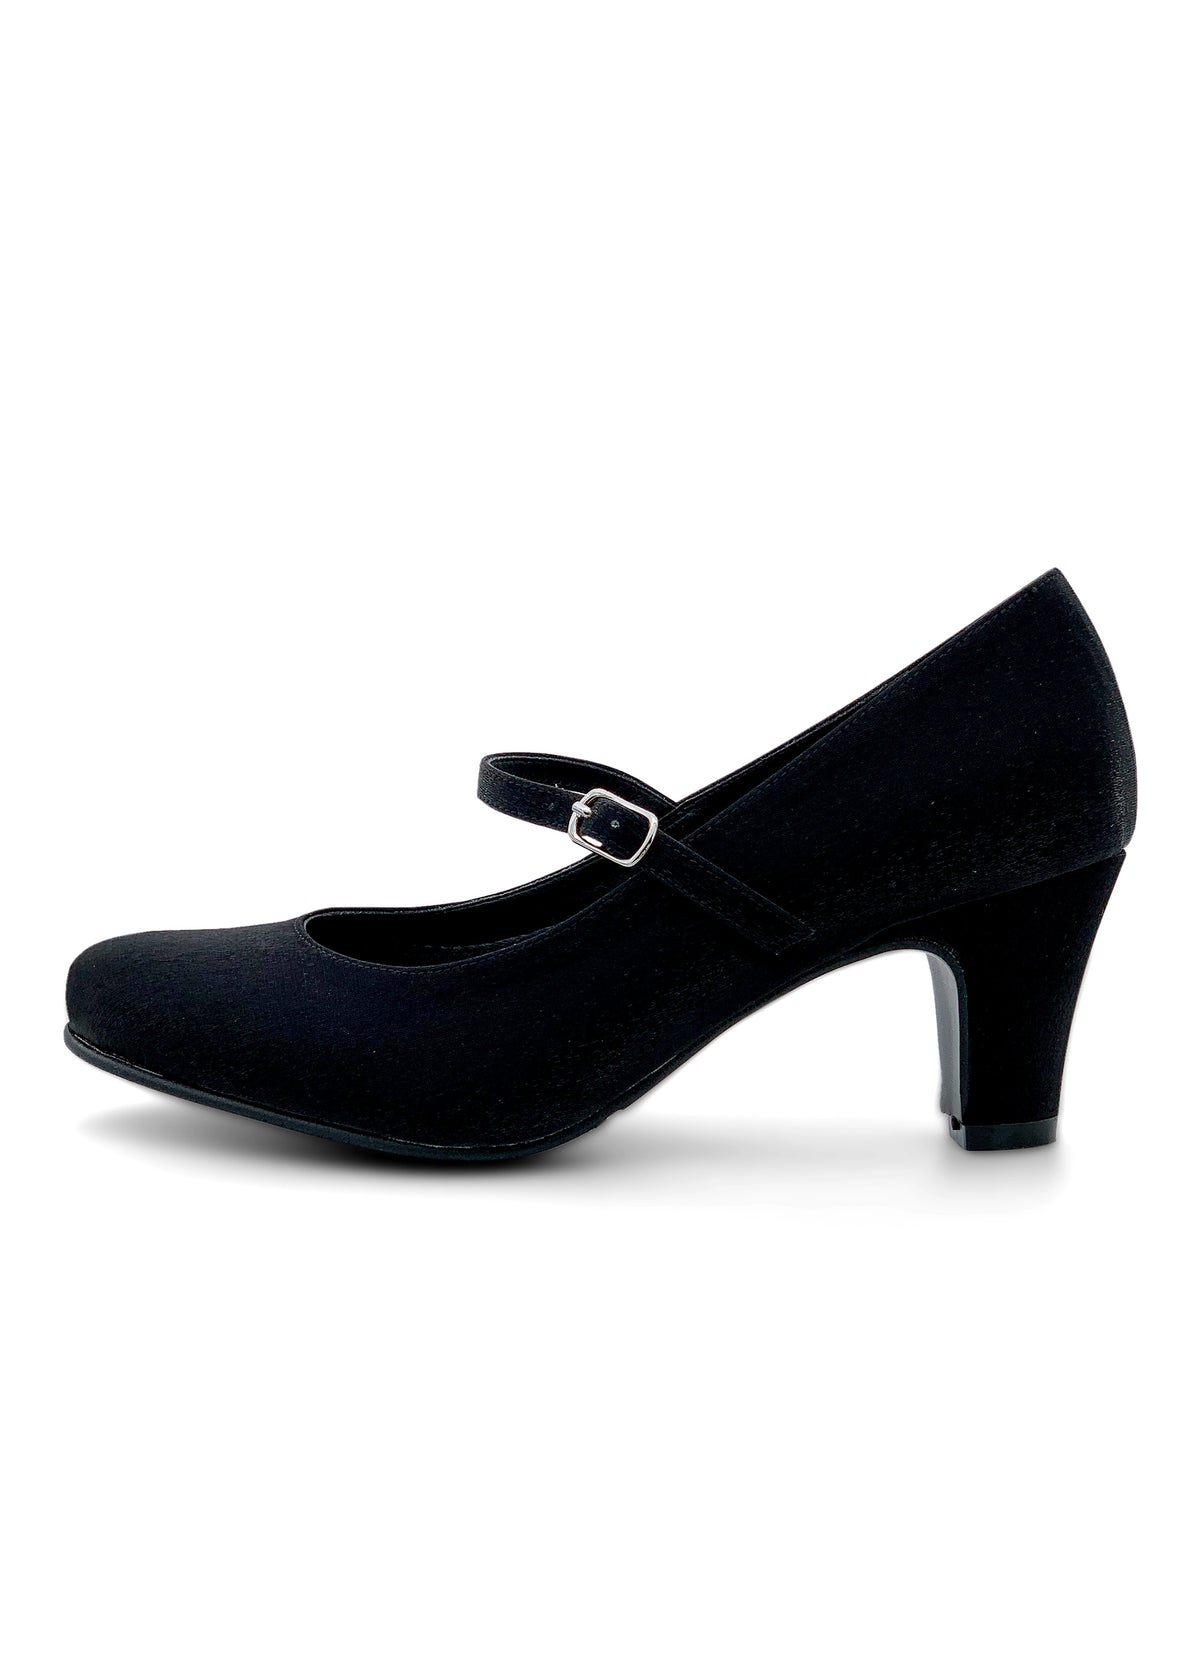 Open toe shoes with a thin thong - black satin